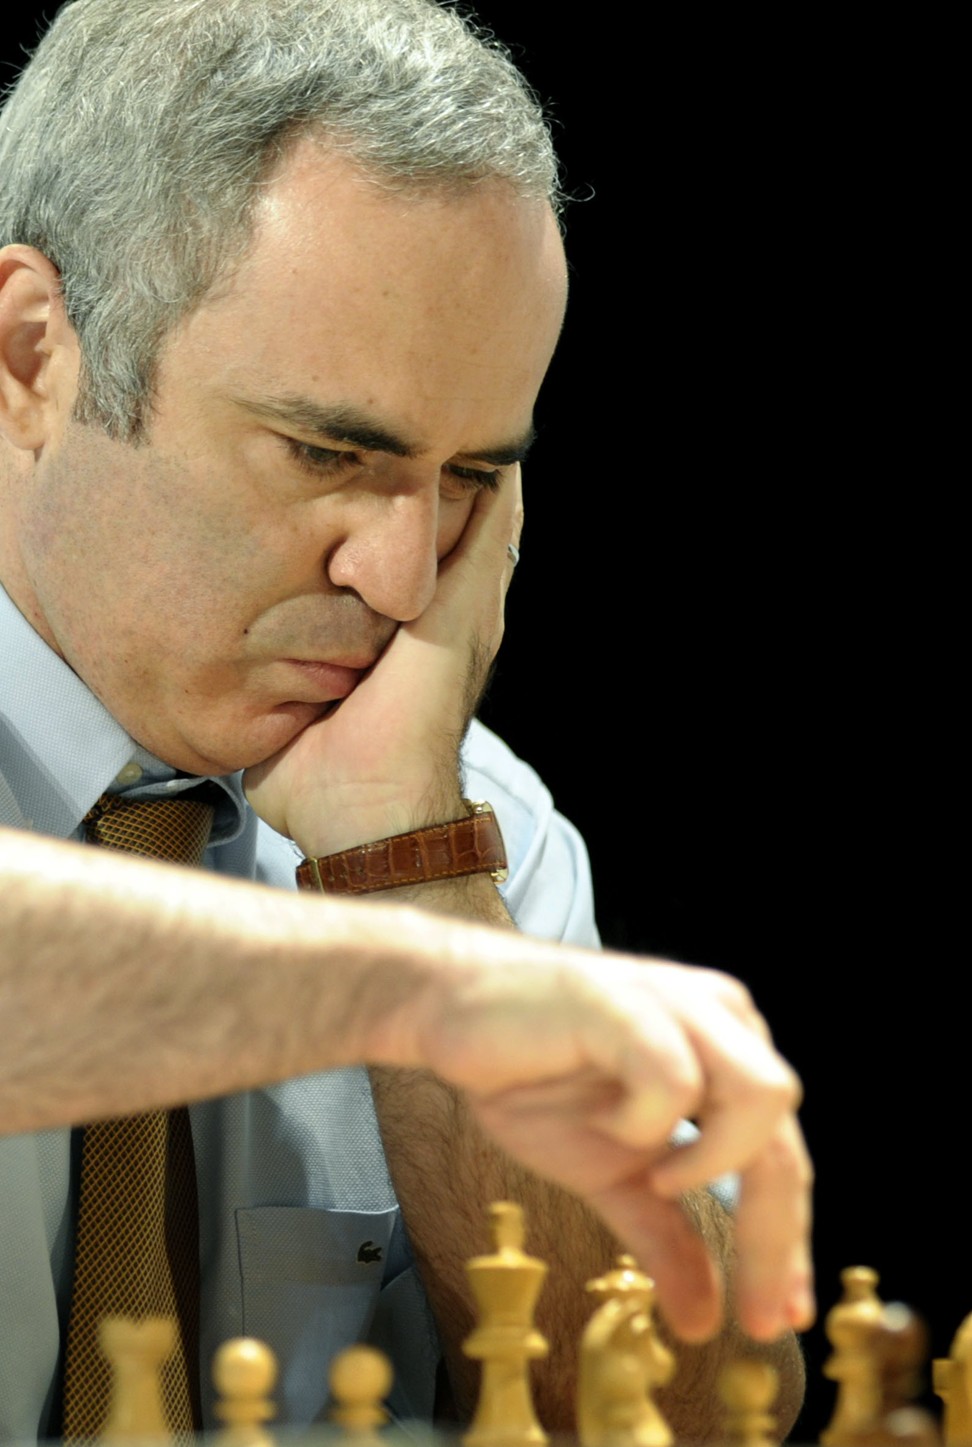 Checkmate: 'chess god' Kasparov returns to compete 12 years after retirement. South China Morning Post